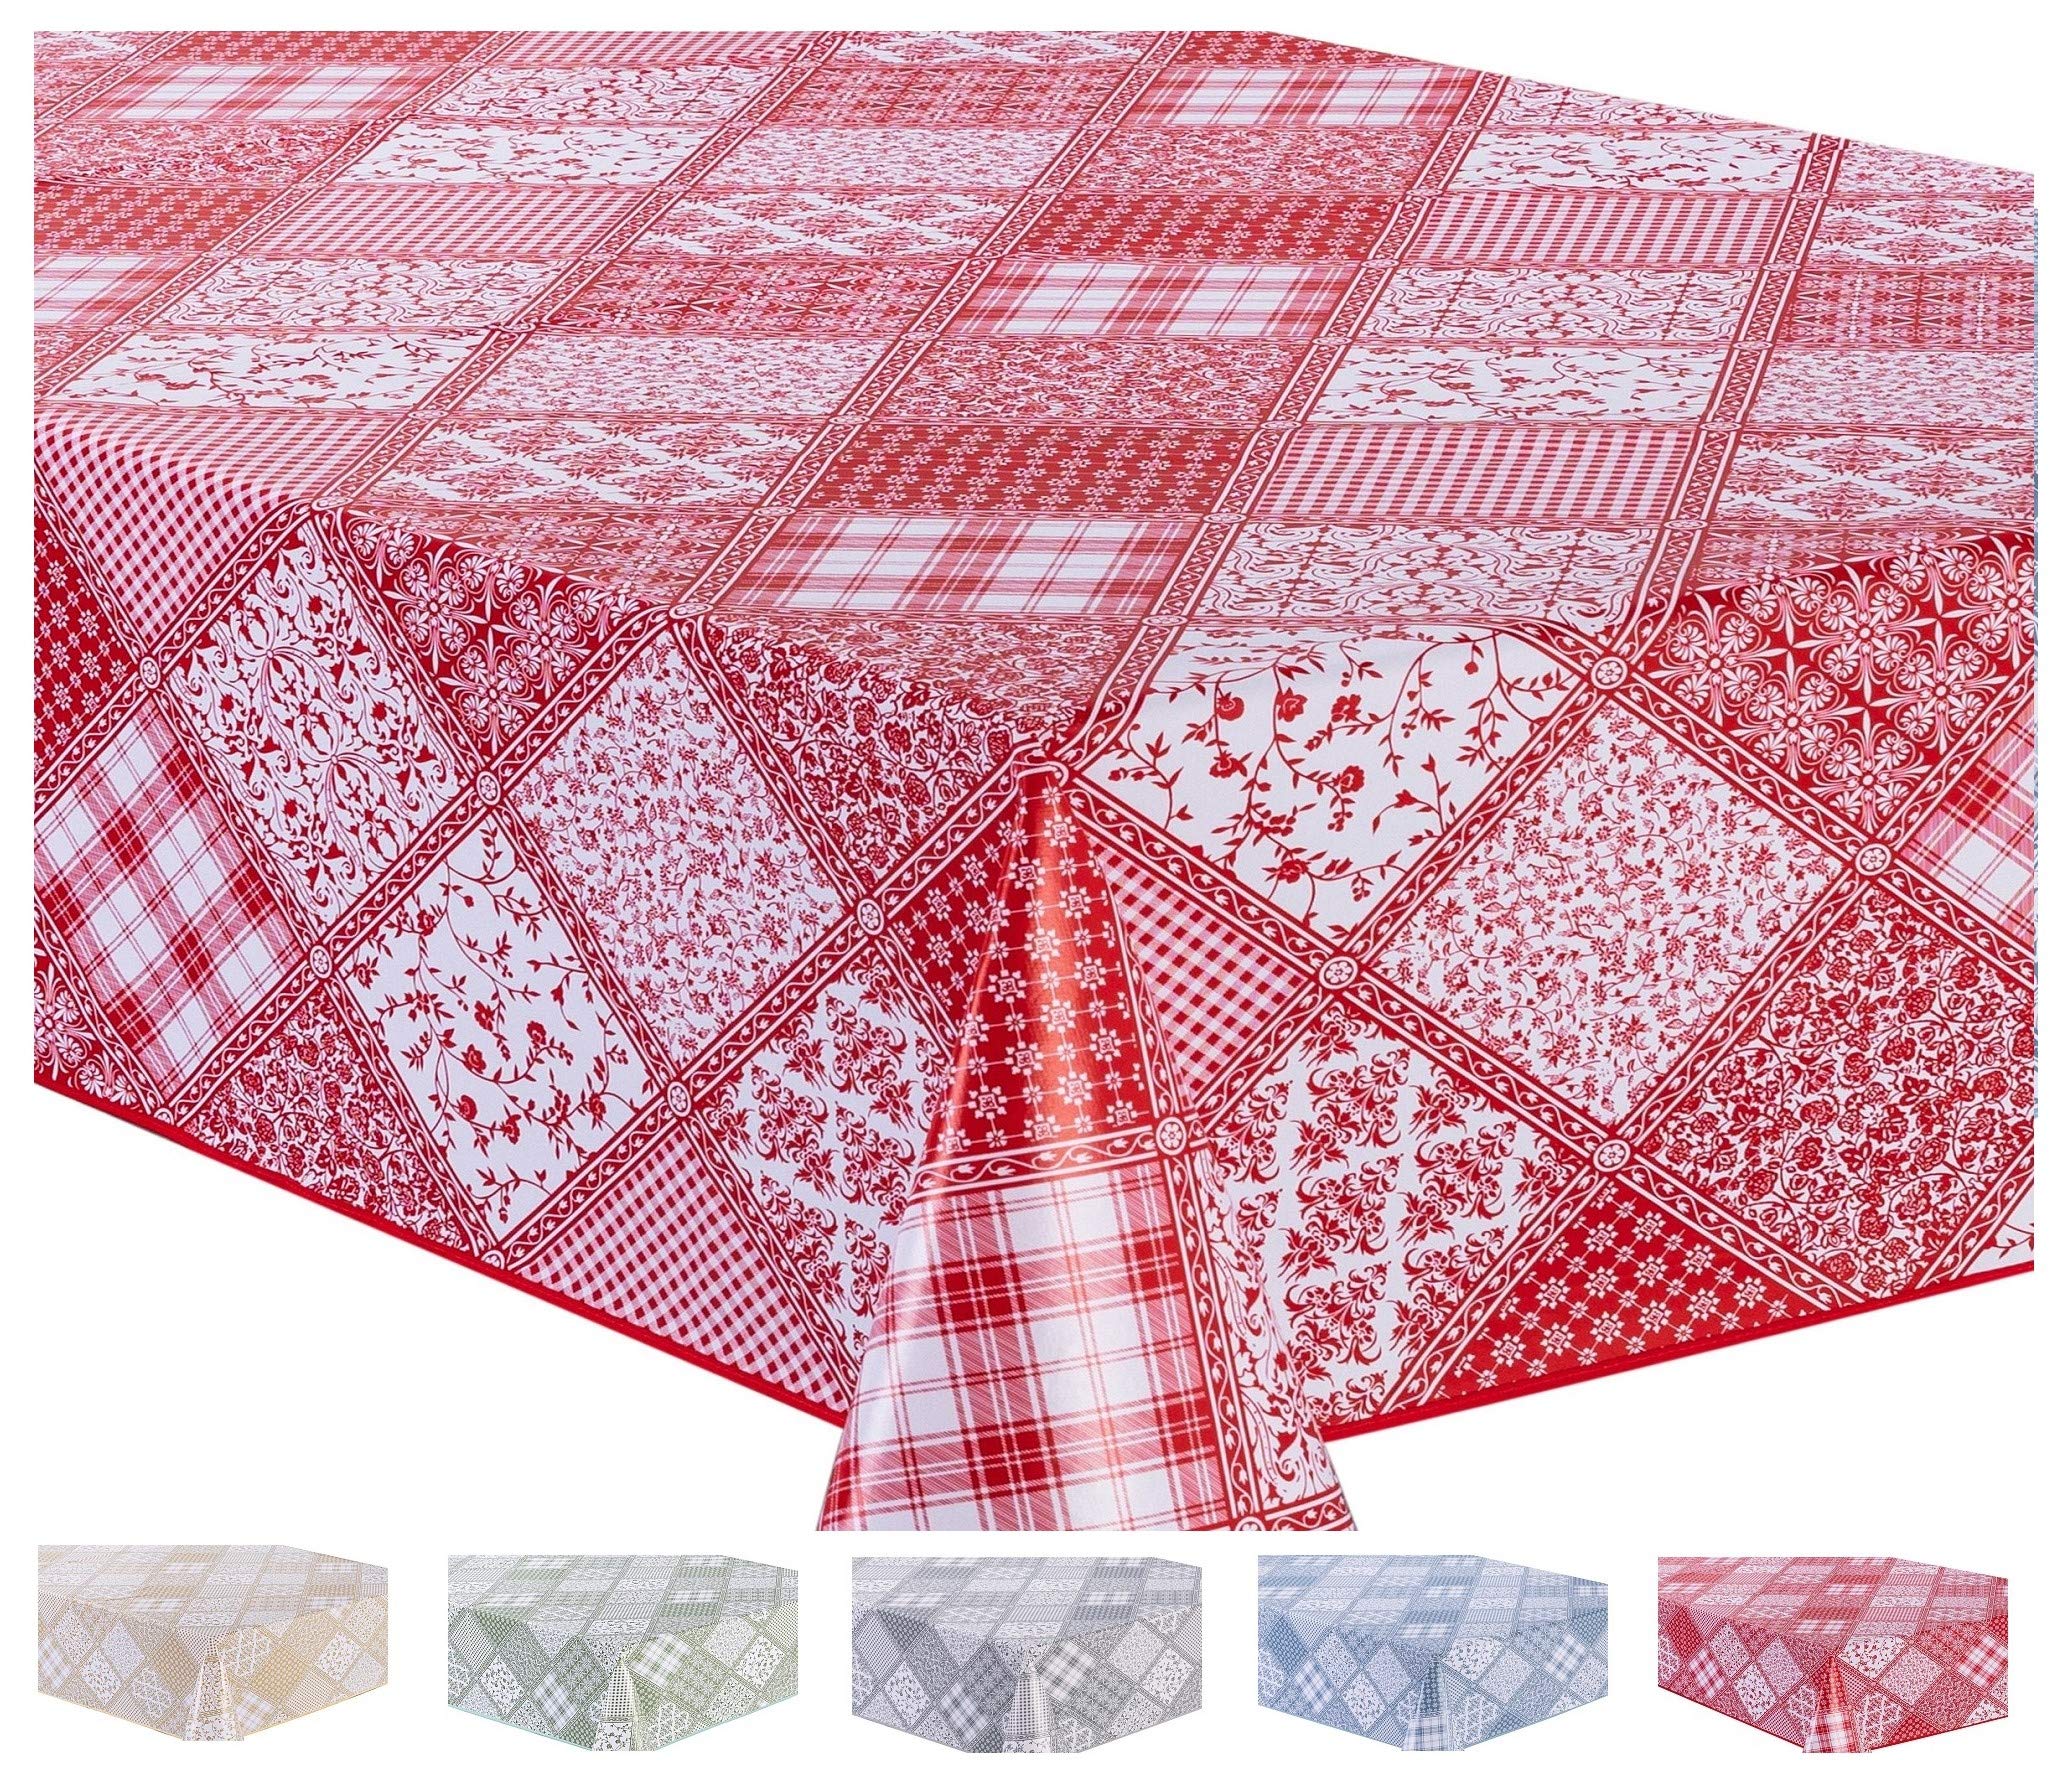 Home Direct Rectangular Oilcloth PVC Wipe Clean Tablecloth Table Cover 140cm x 200cm 55x78 Red